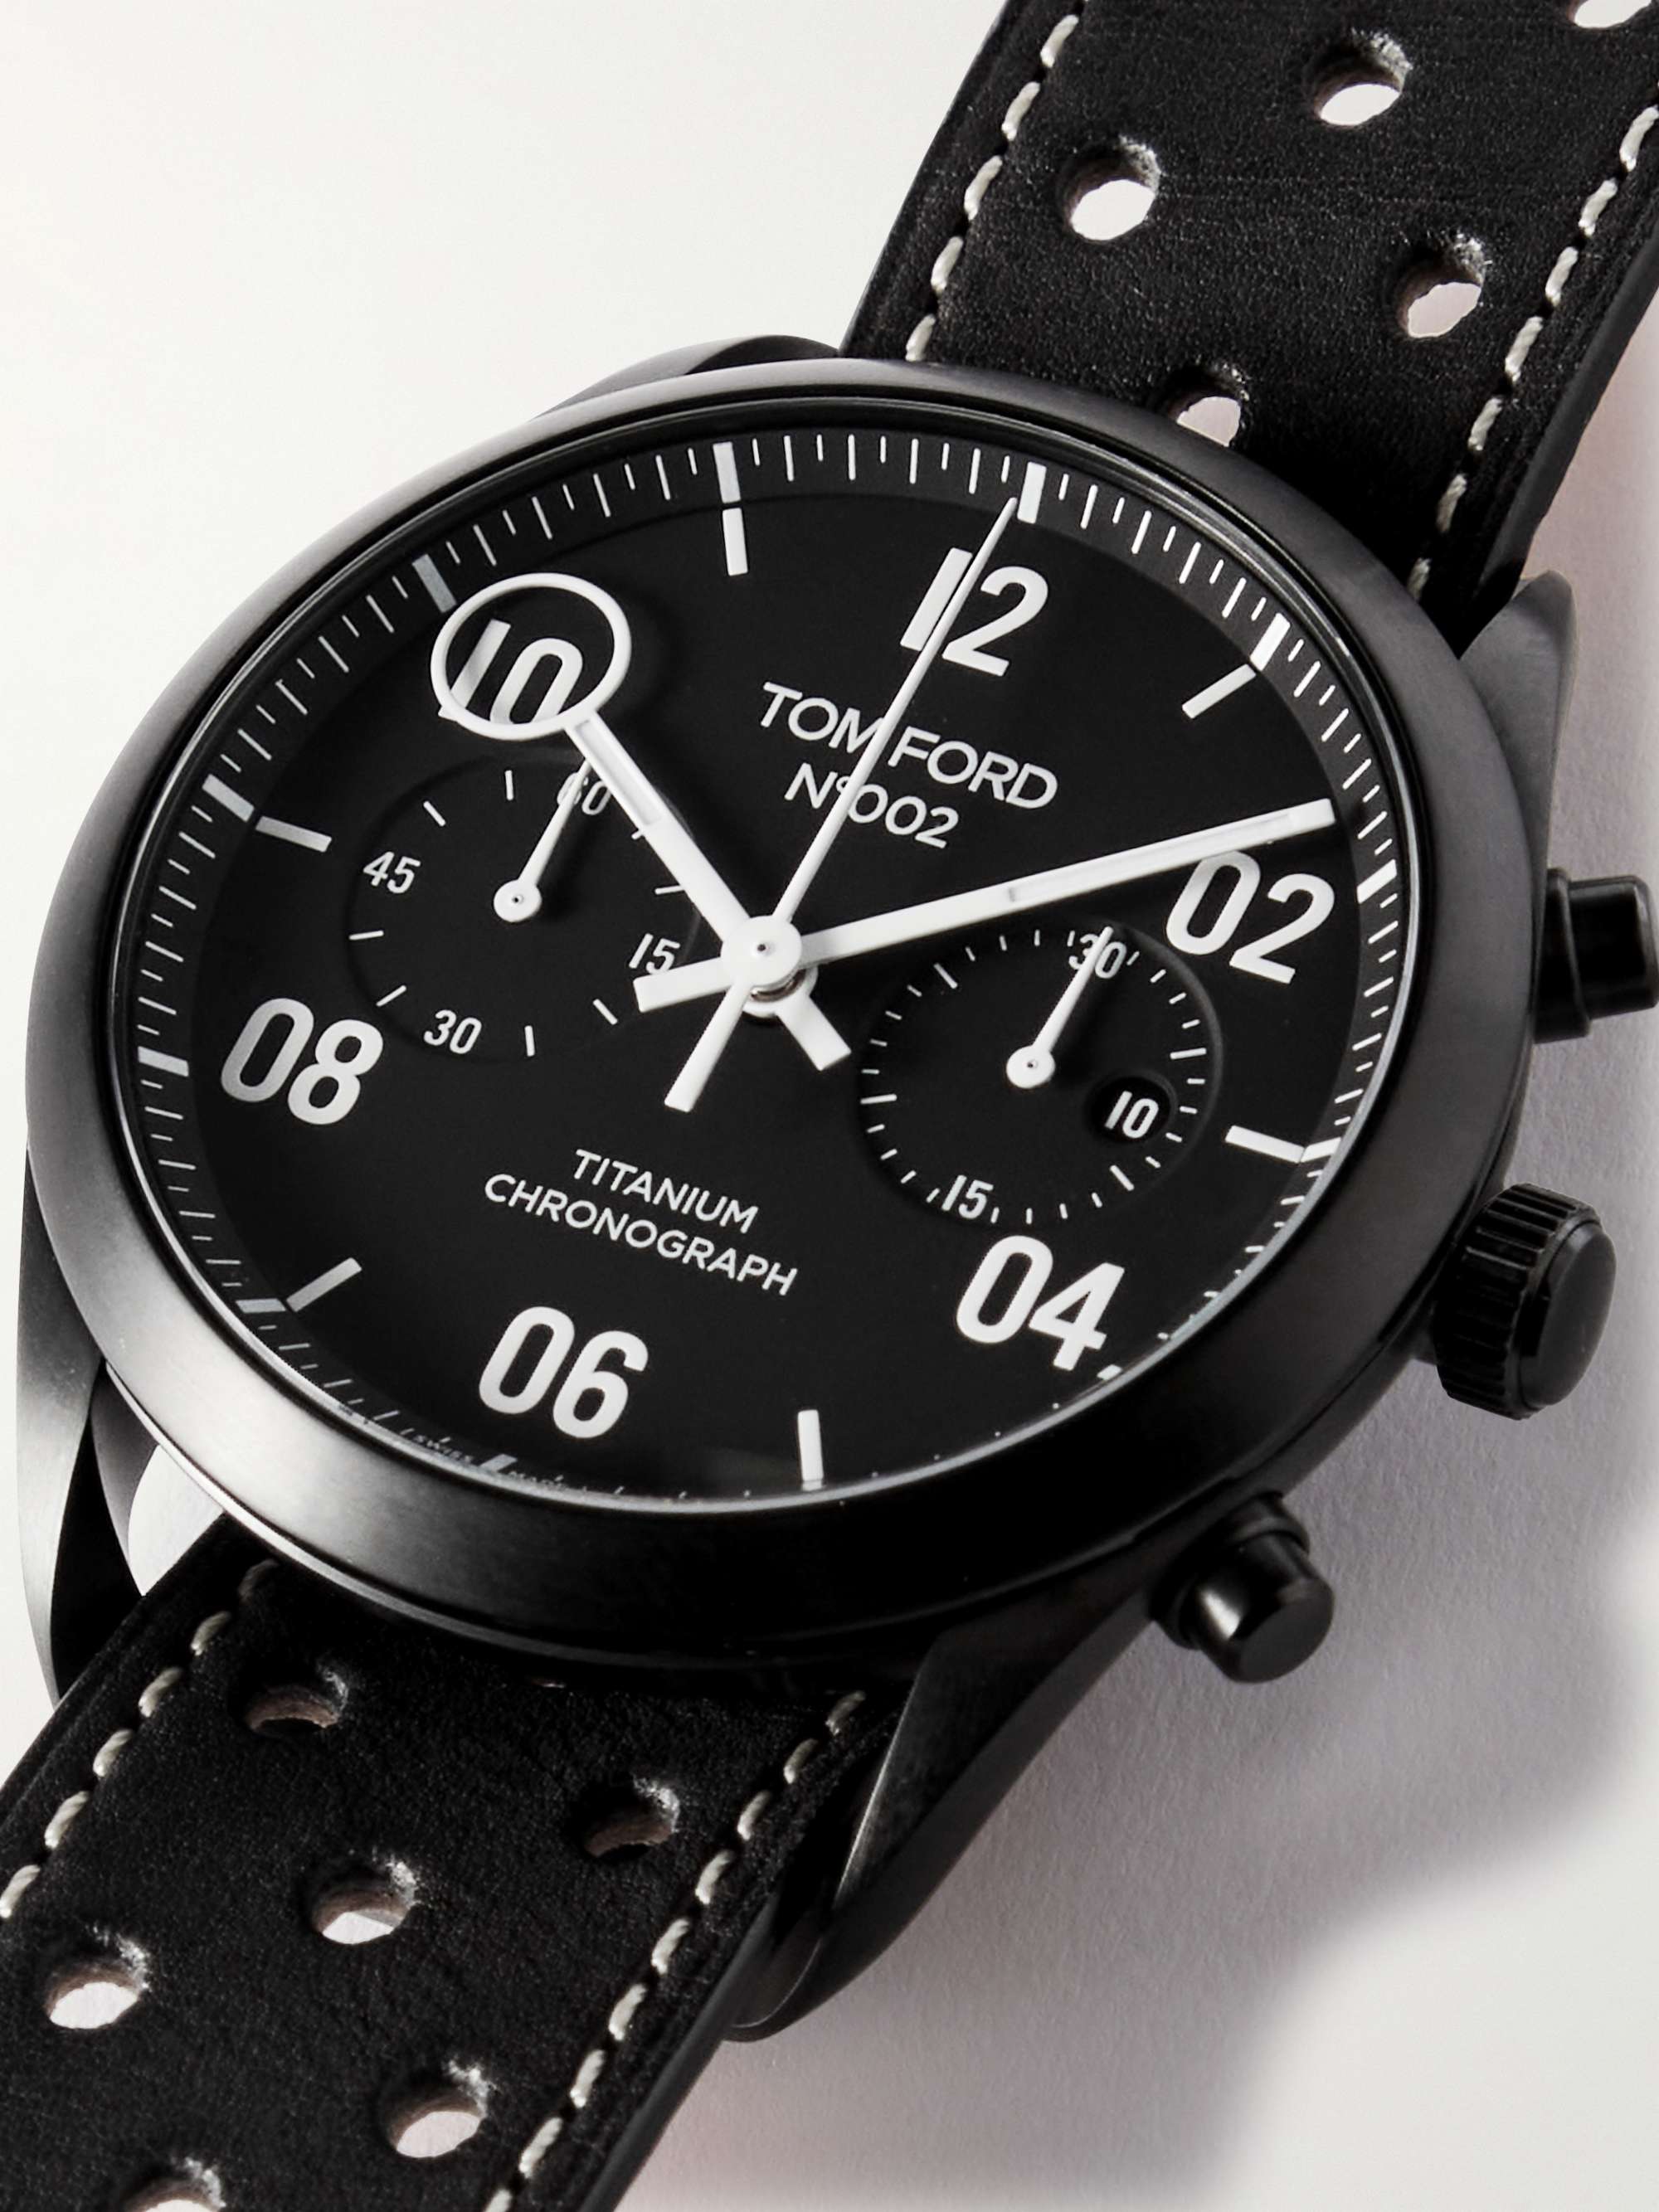 TOM FORD TIMEPIECES 002 Limited Edition Automatic 43.5mm Titanium and Perforated Leather Watch